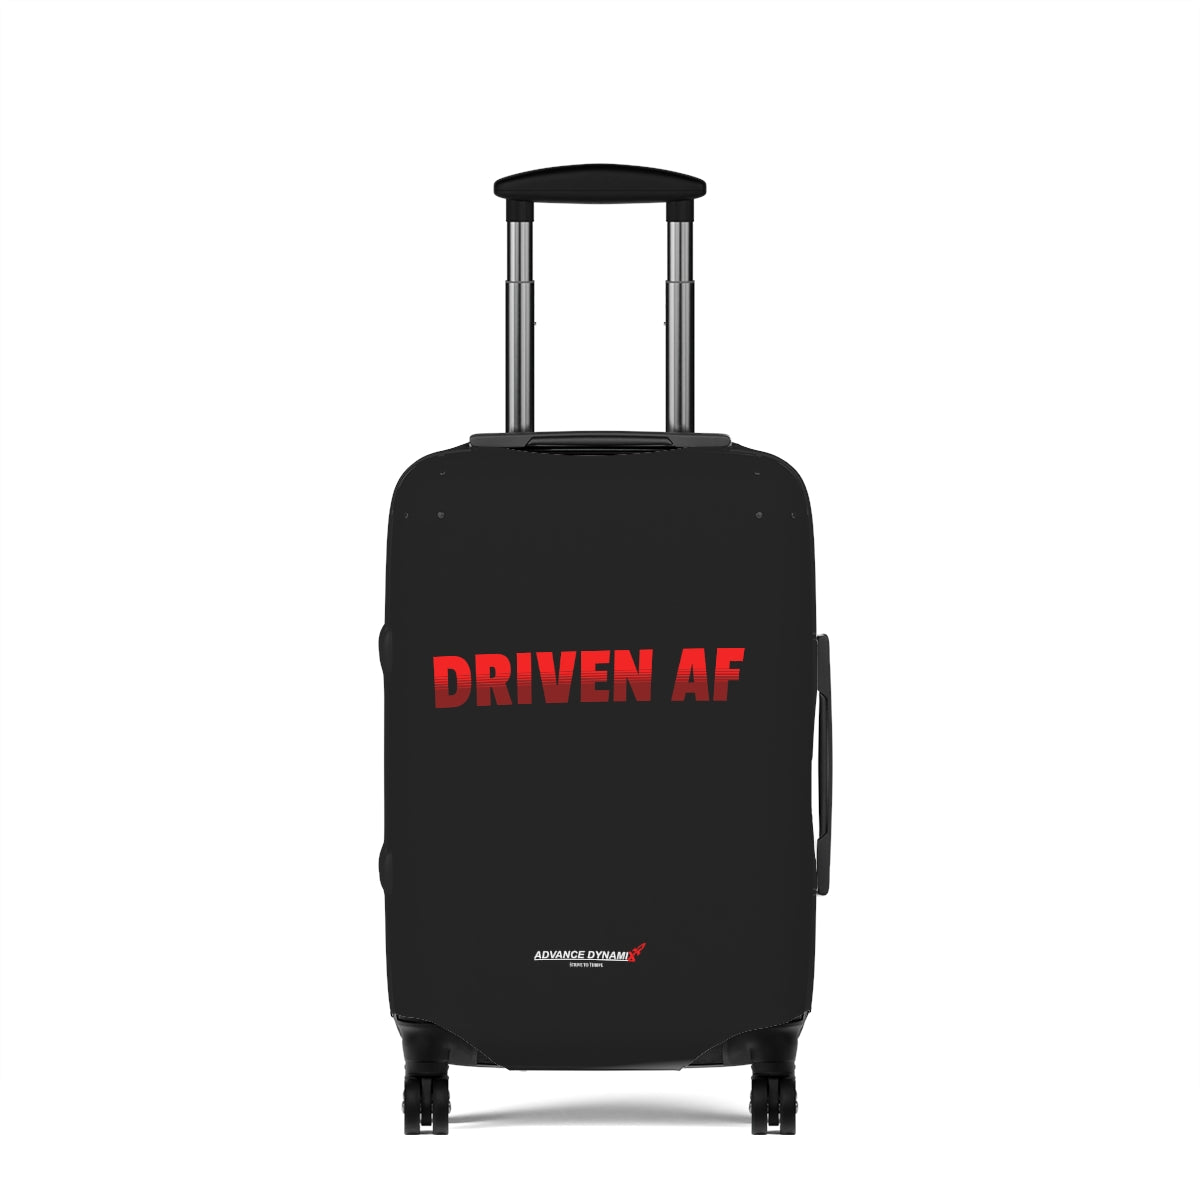 Driven AF - Luggage Covers Infused with Advance Dynamix Add-A-Tude - Tell the world!